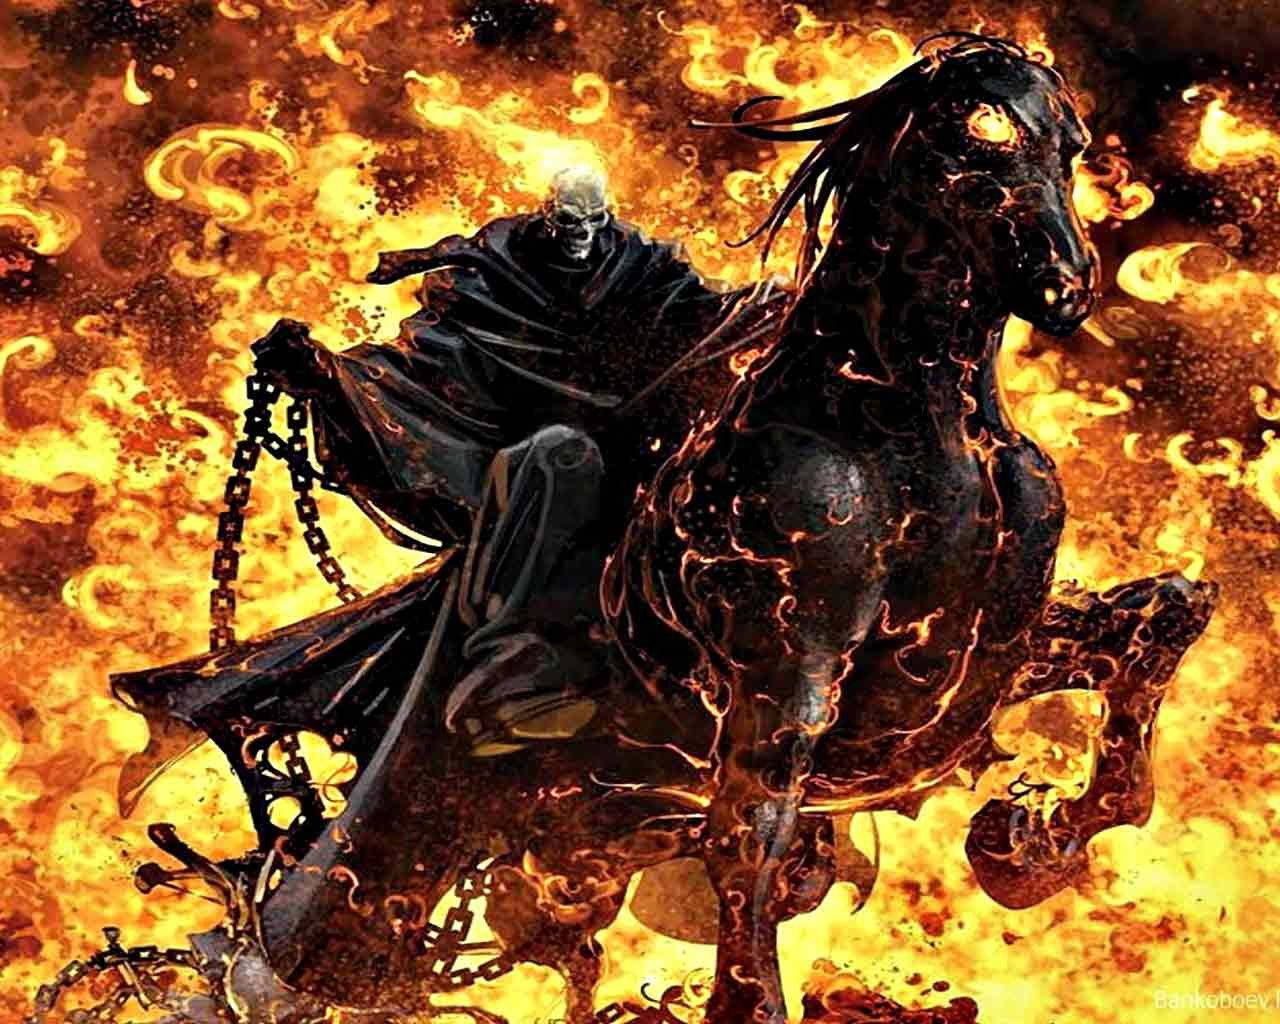 Free Ghost Rider Wallpaper Downloads, [100+] Ghost Rider Wallpapers for FREE  